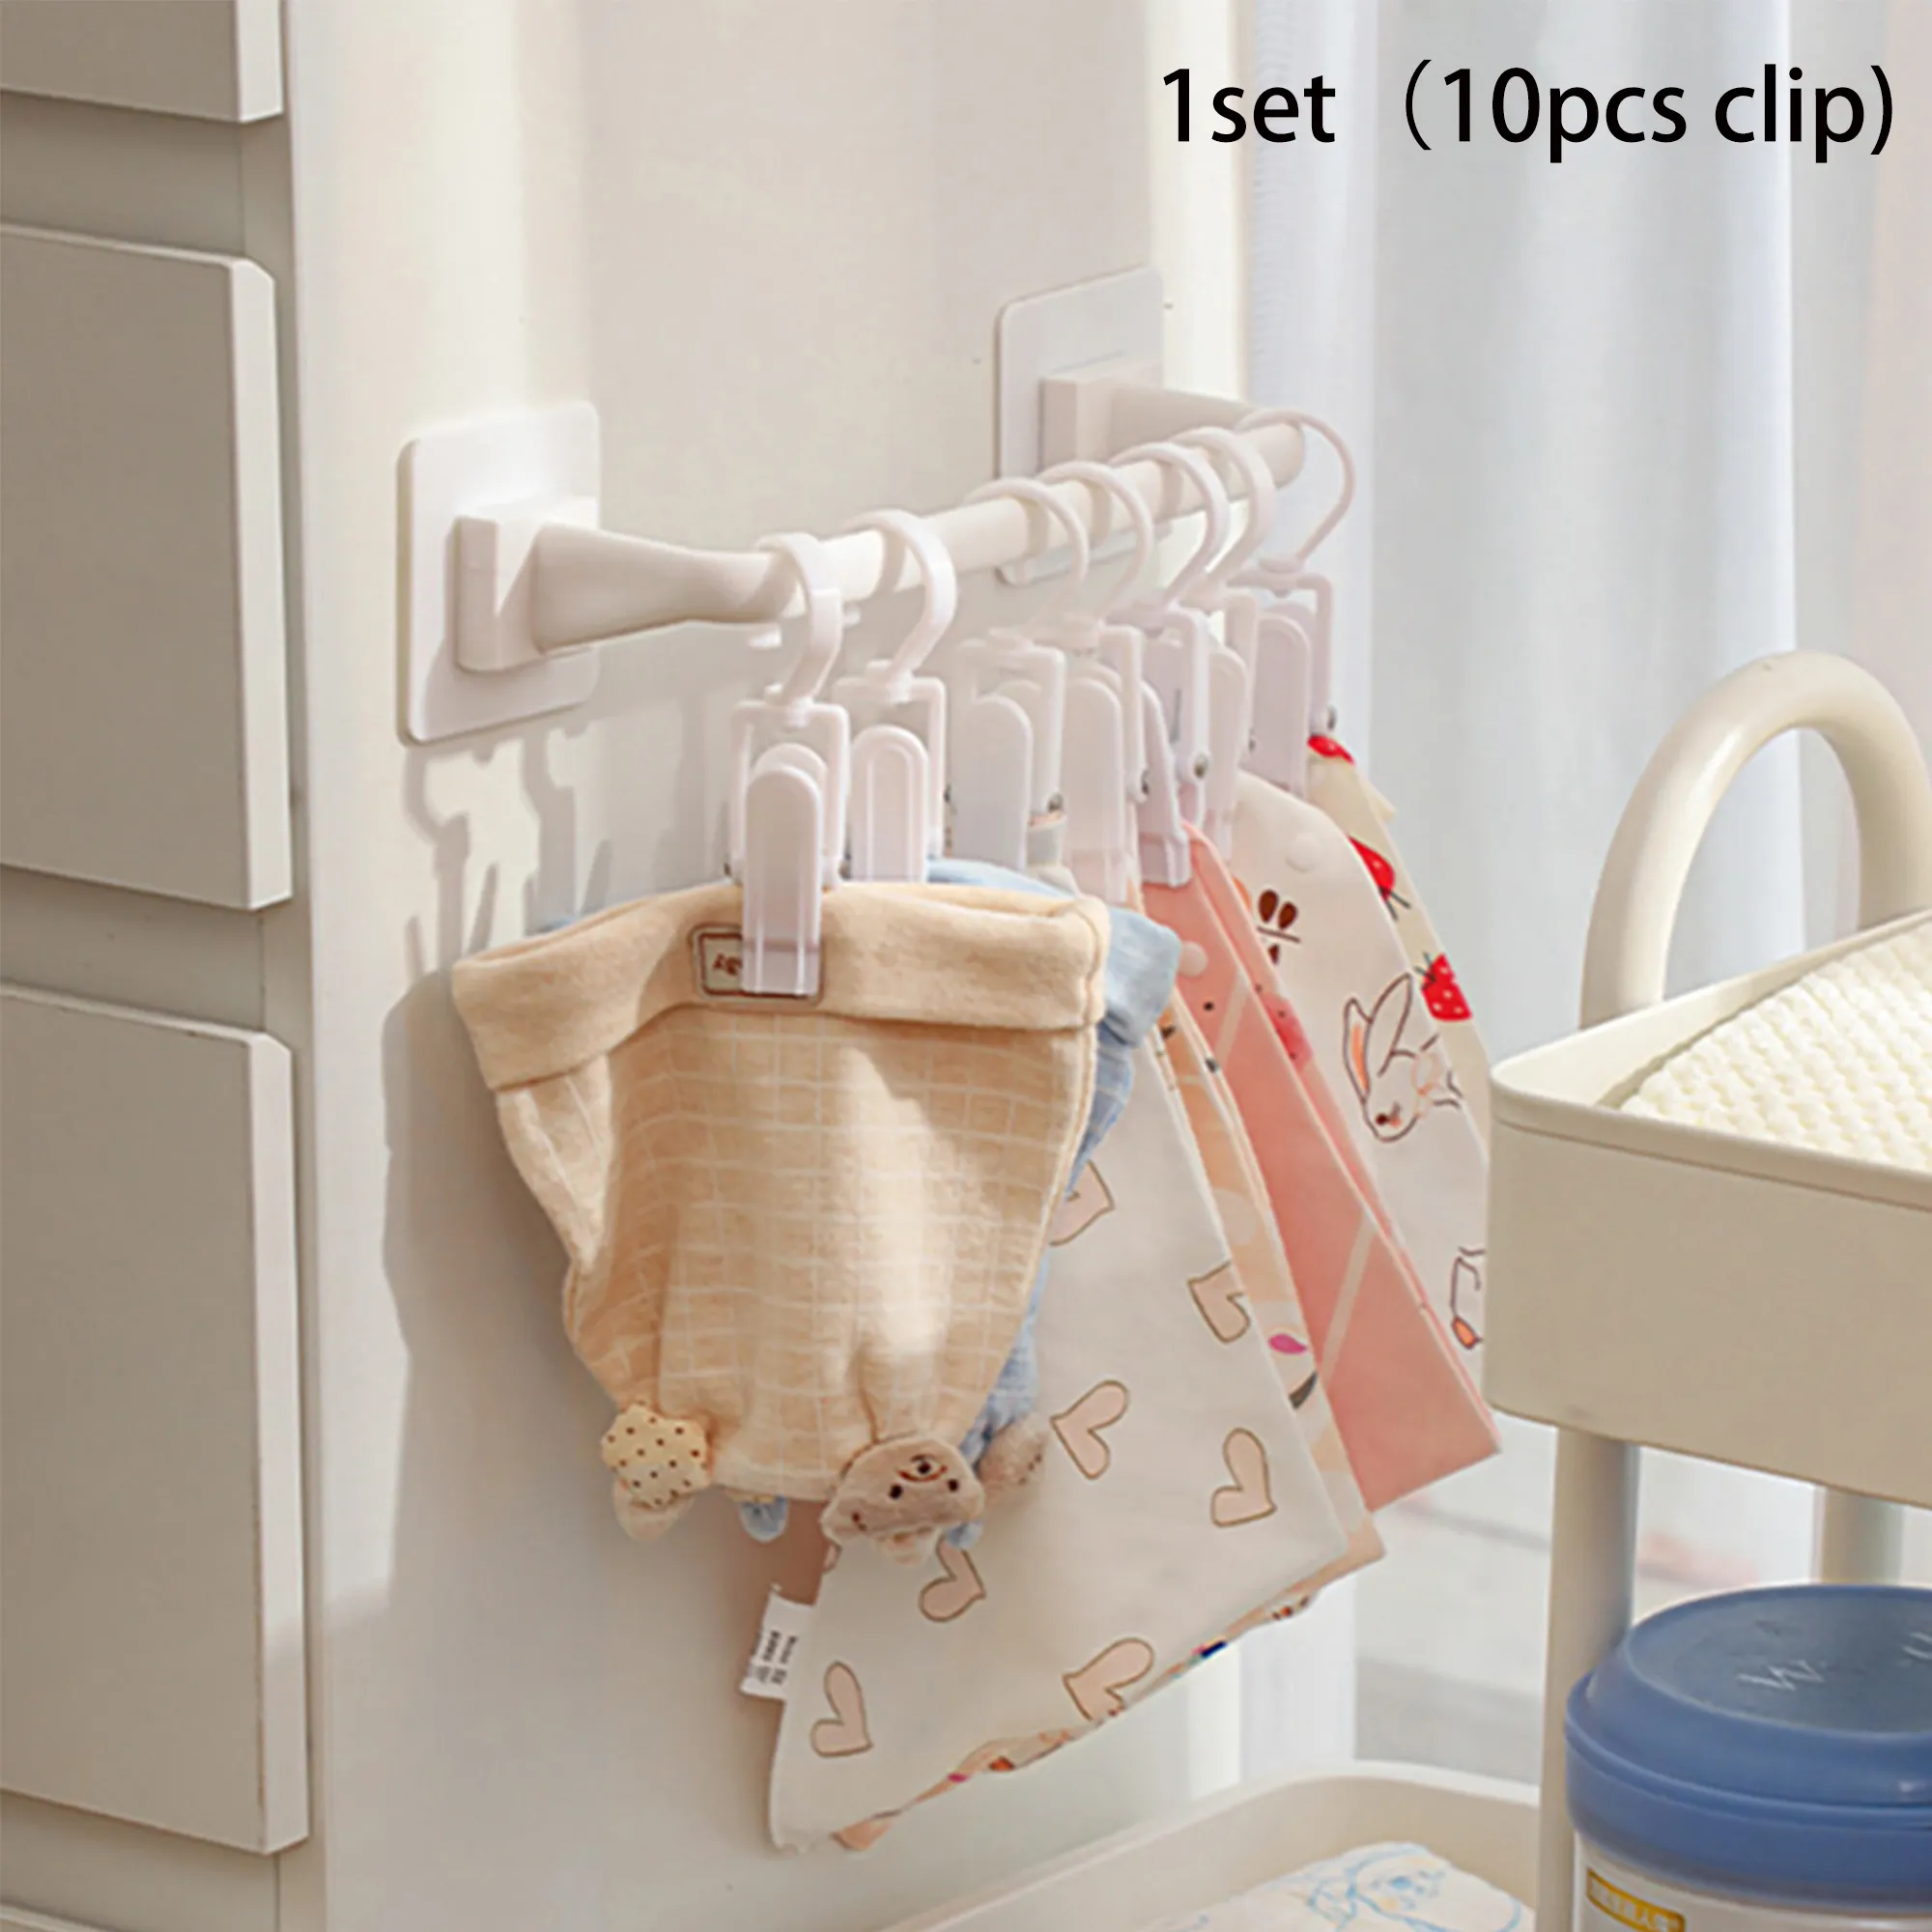 A Set Of Wardrobe Hanging Rods, Towels, Socks And Hats Without Punching, Storage Clips